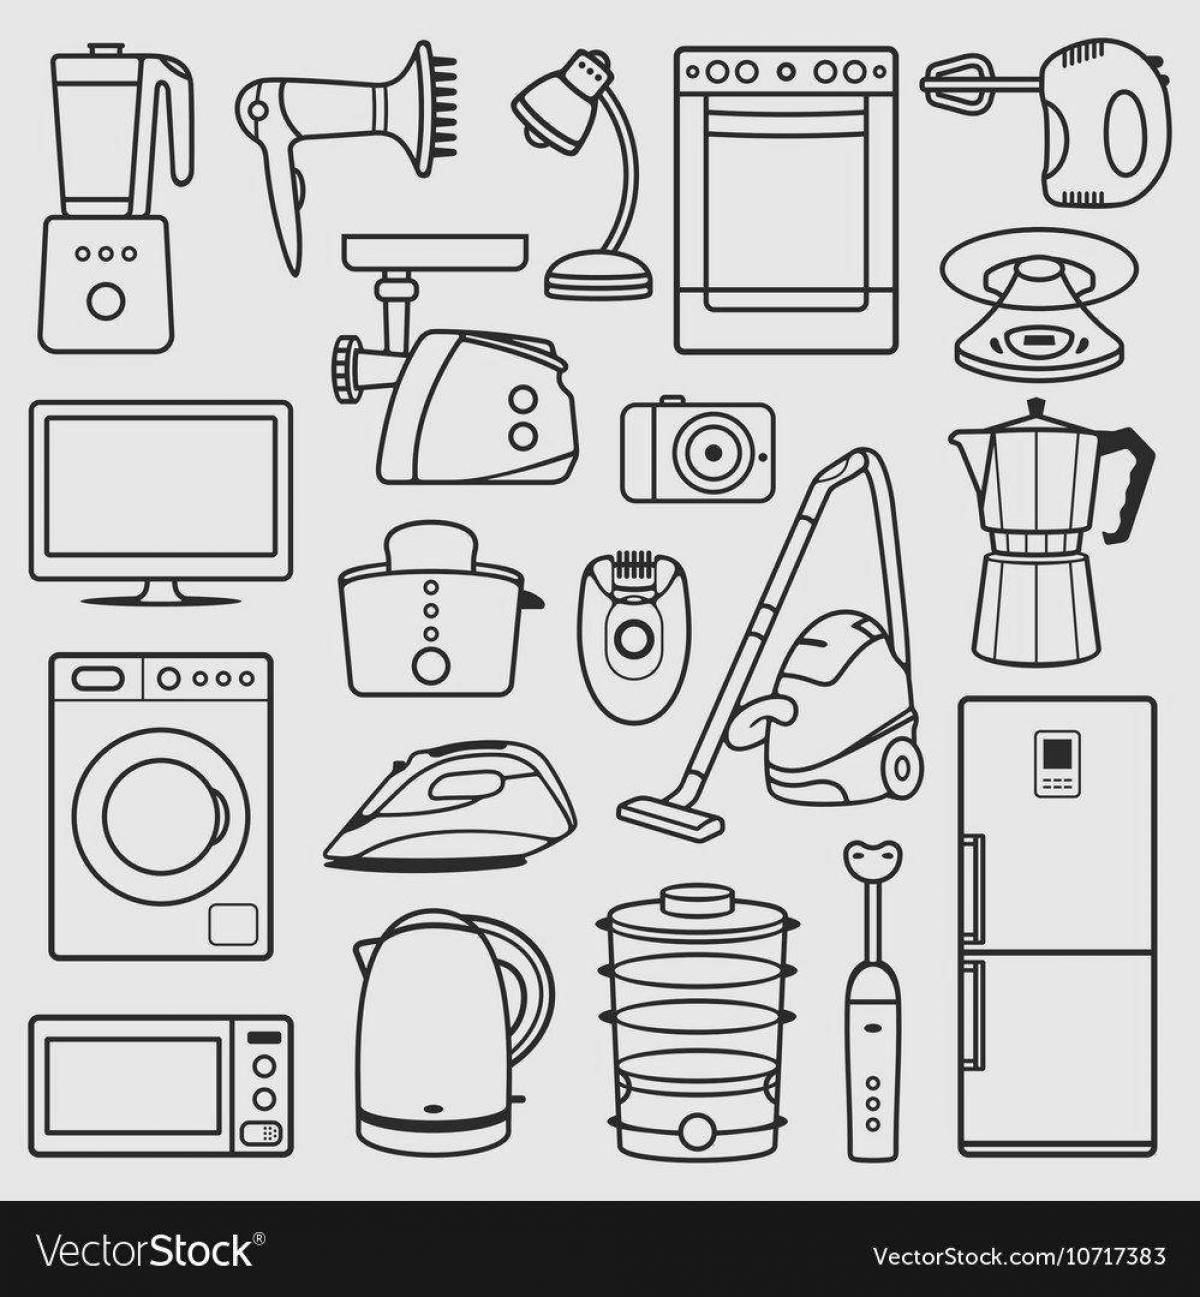 Colorful electrical appliances coloring book for children 6-7 years old